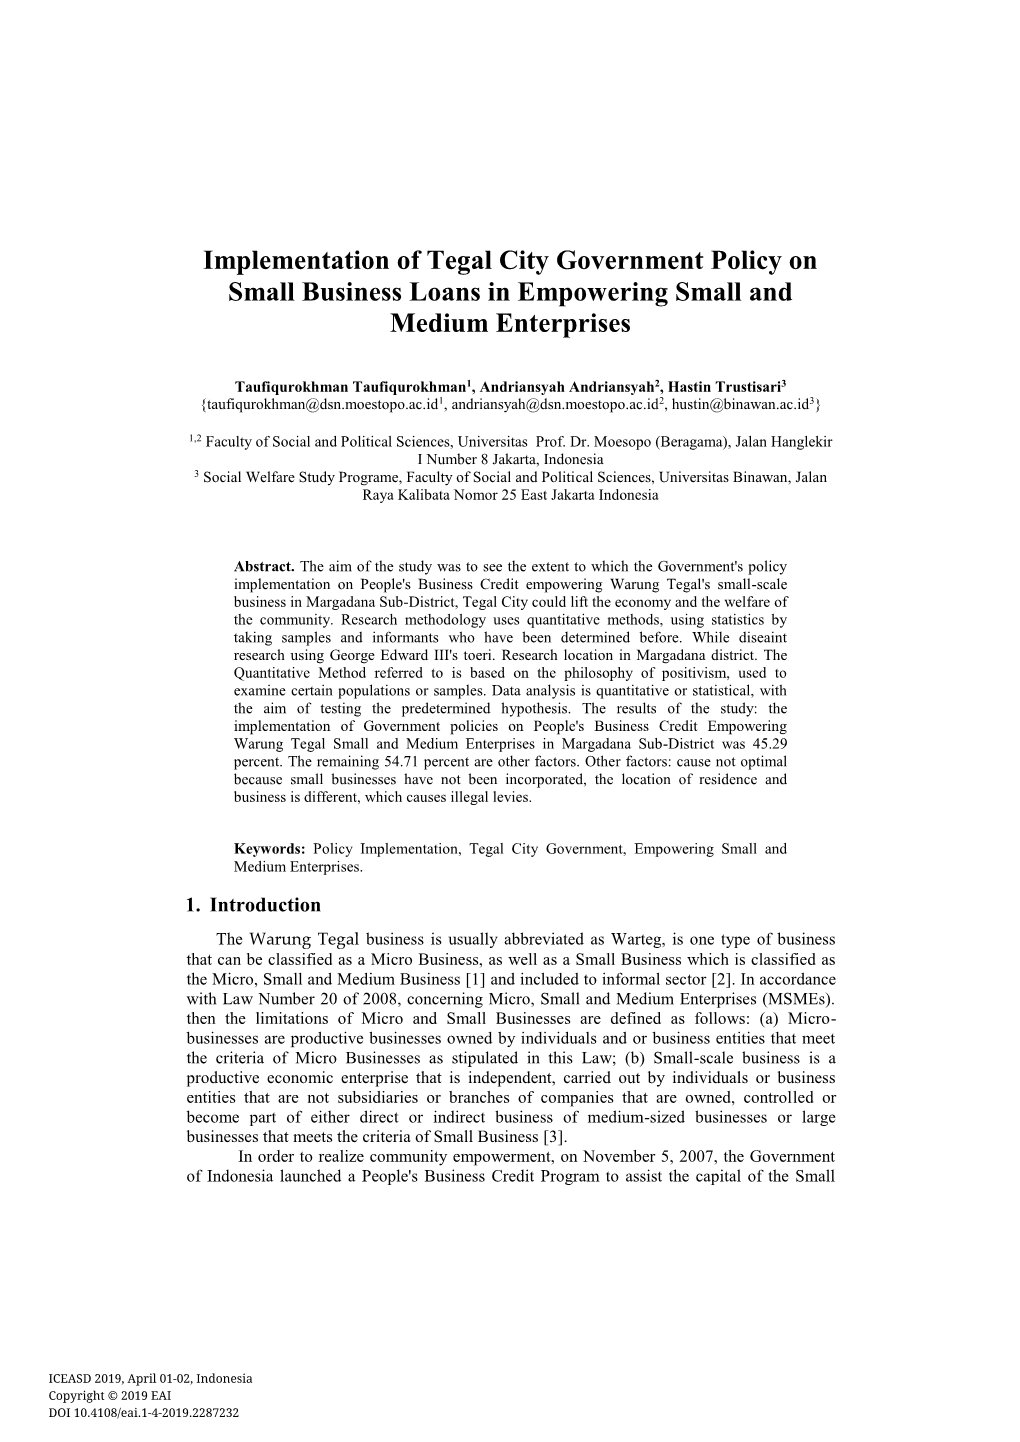 Implementation of Tegal City Government Policy on Small Business Loans in Empowering Small and Medium Enterprises